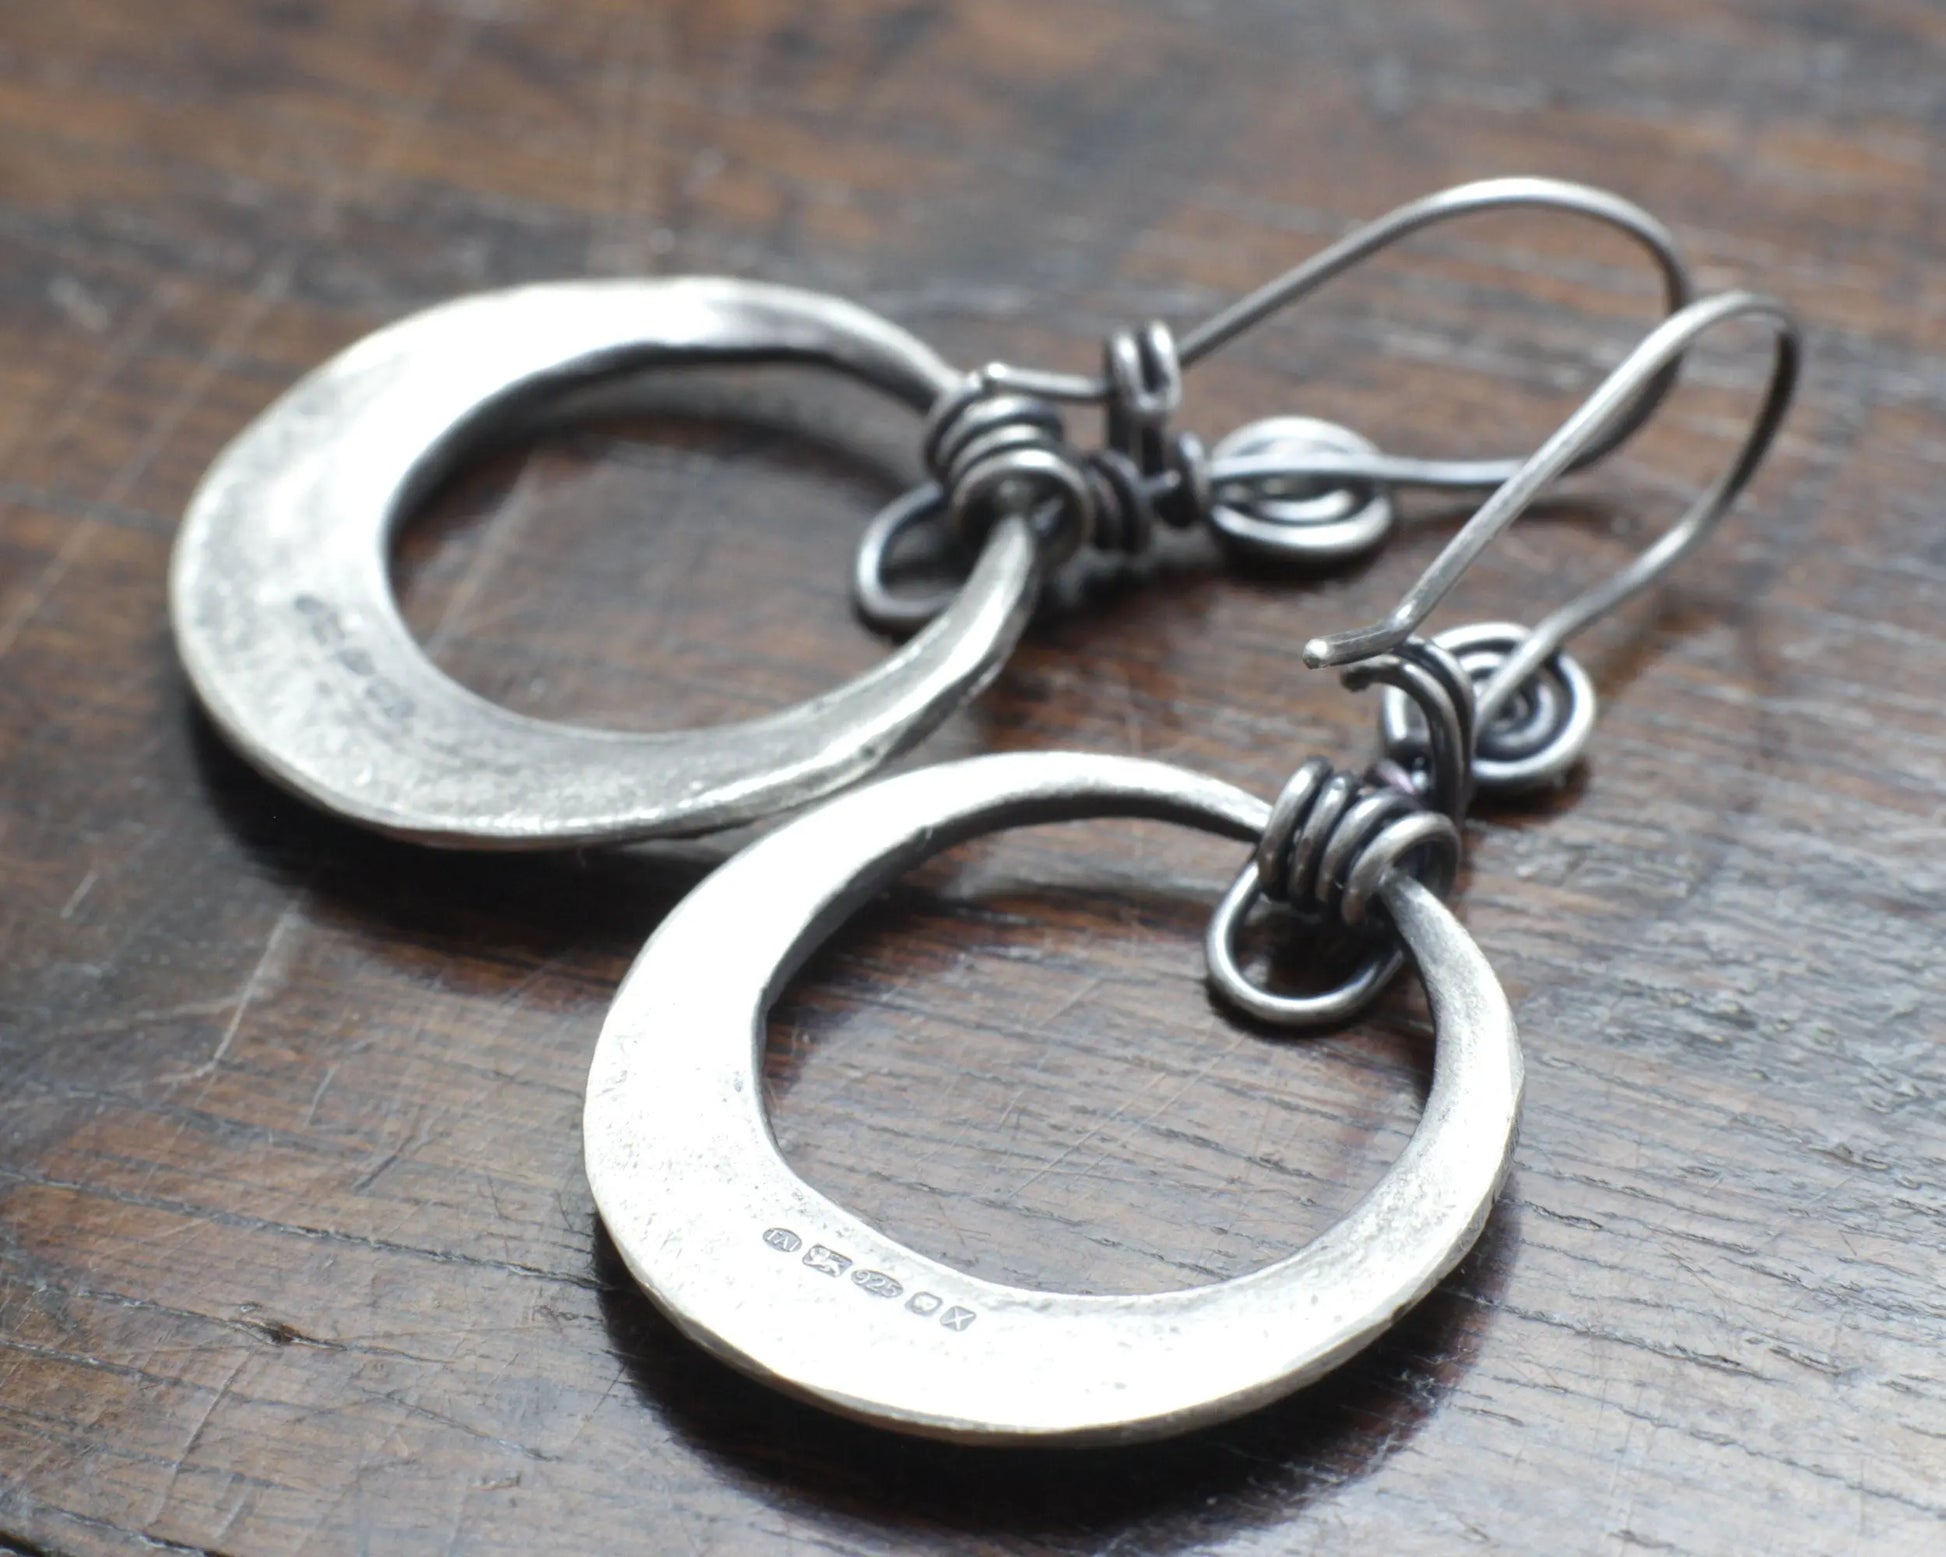 Forged Silver Moon Earrings, made and designed by Marleena Barran, Taitaya Forge, UK